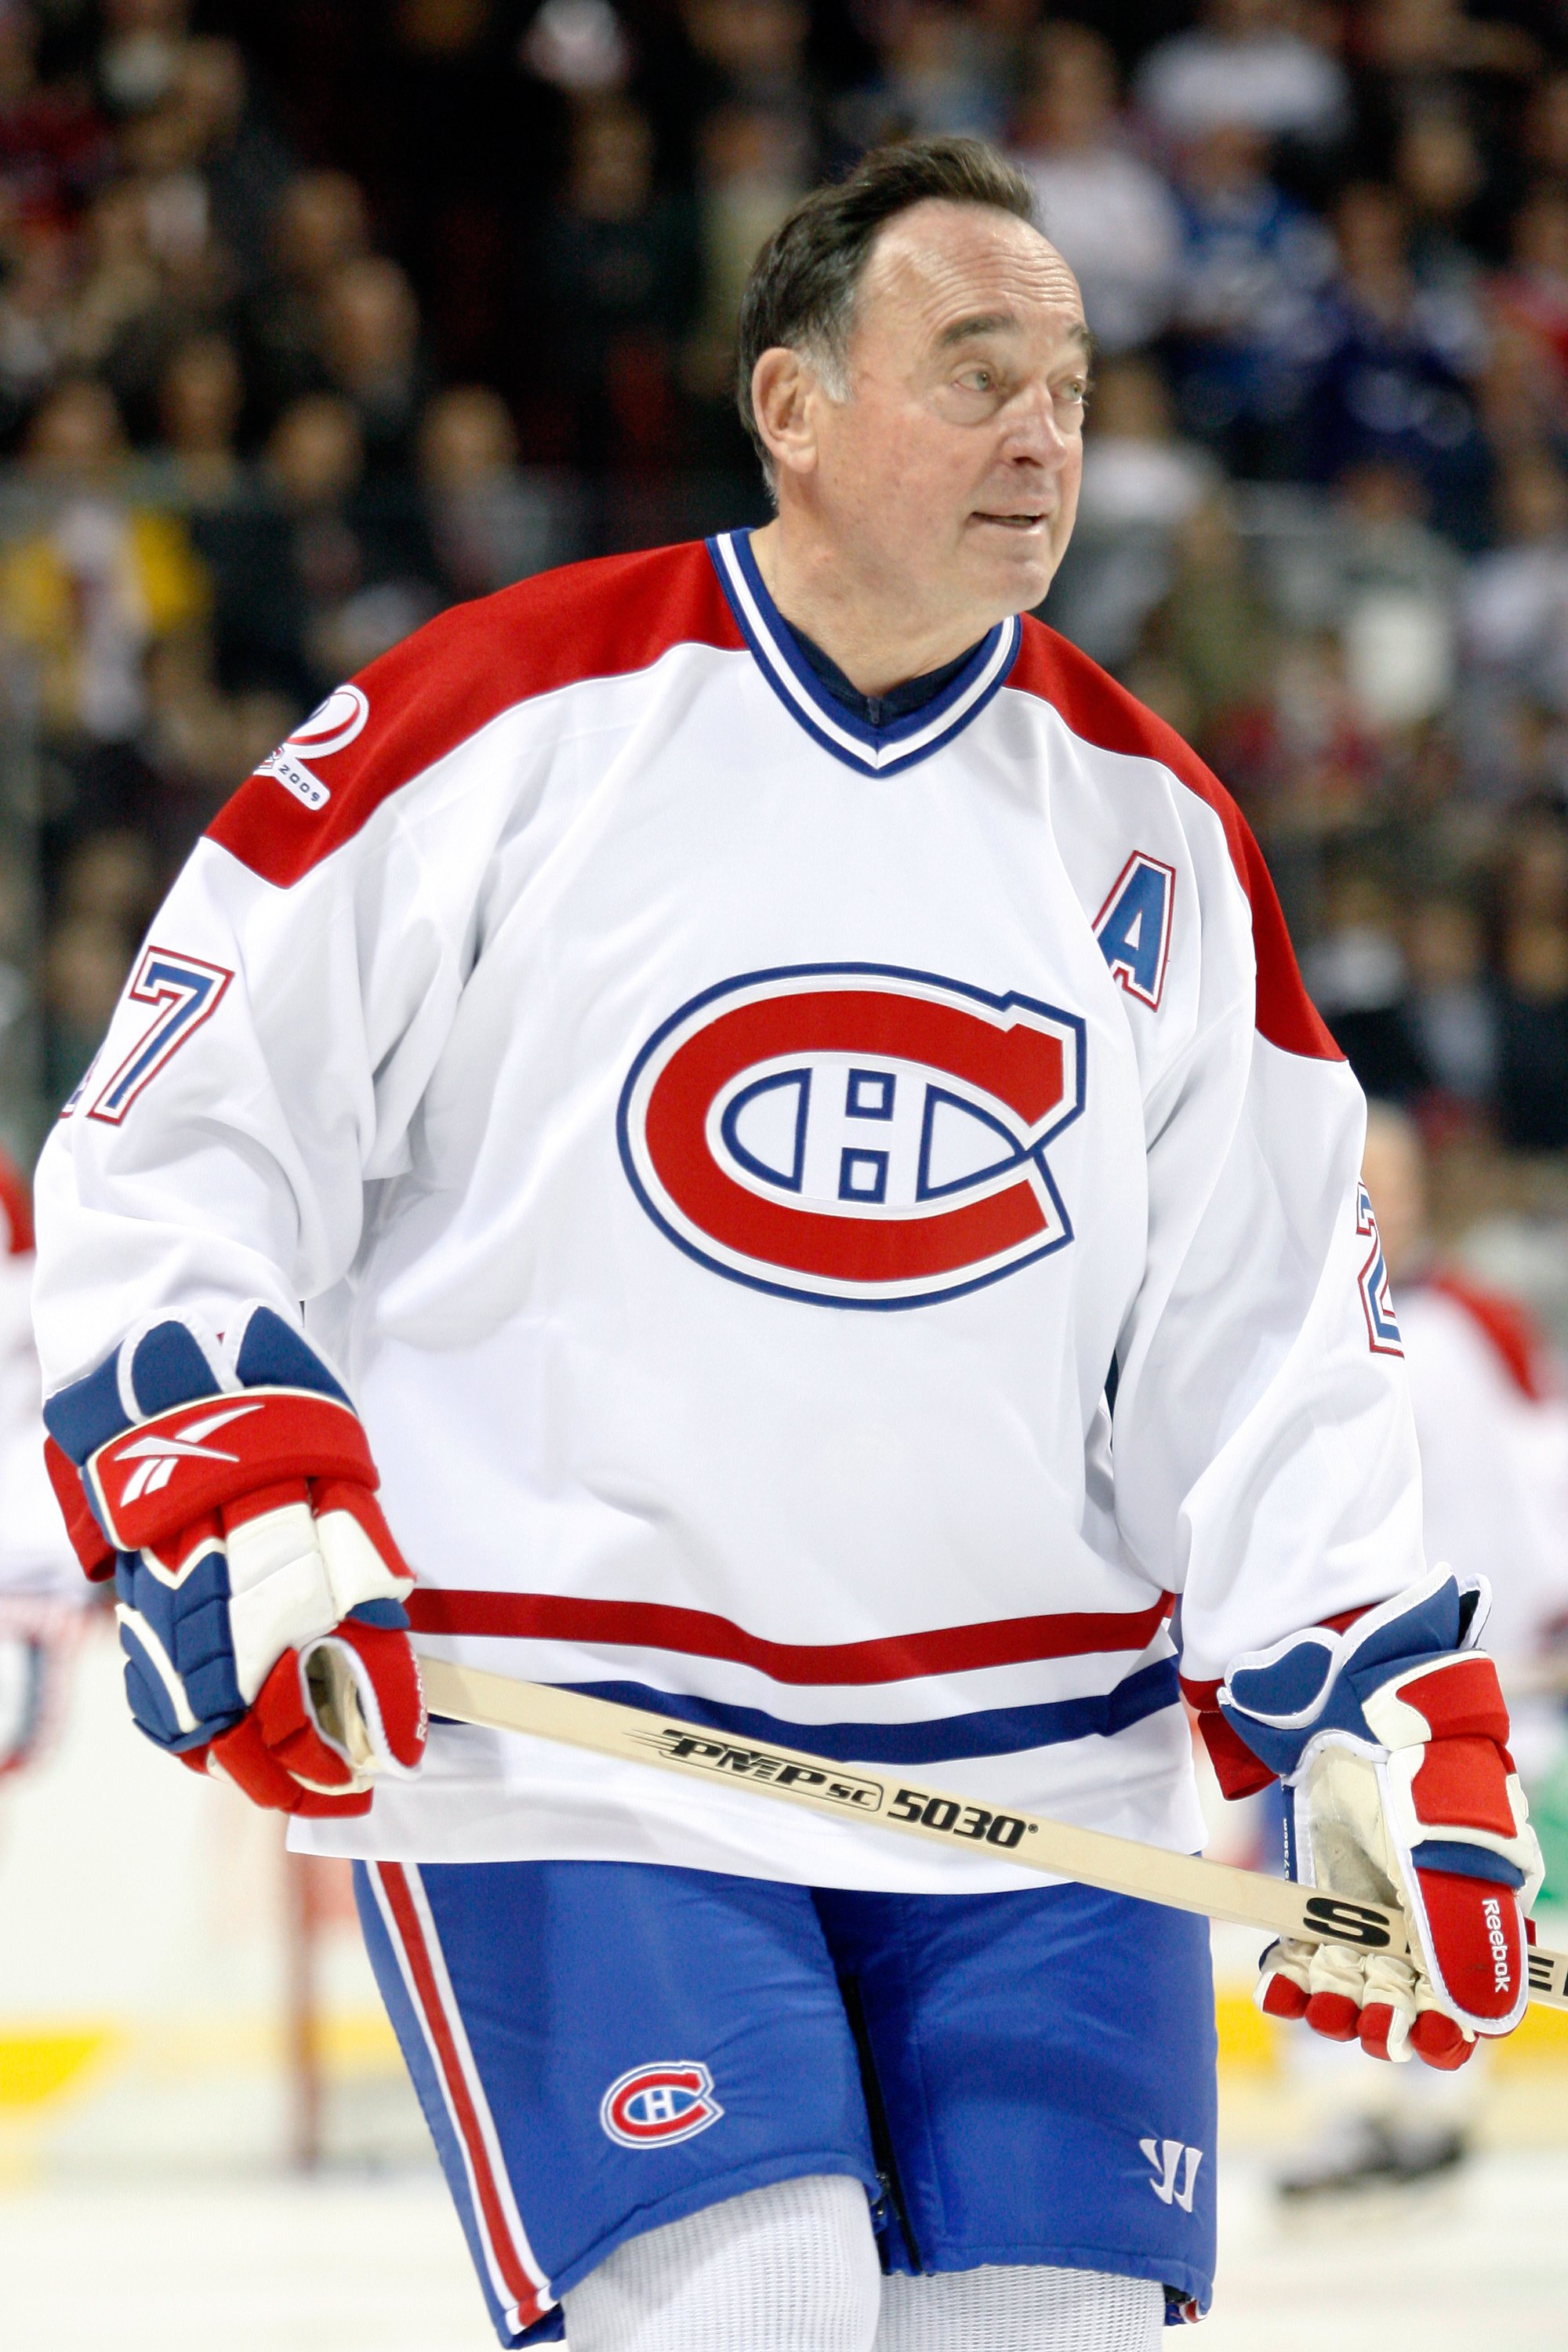 MONTREAL- DECEMBER 4:  Former Montreal Canadien Frank Mahovlich skates during the Centennial Celebration ceremonies prior to the NHL game between the Montreal Canadiens and Boston Bruins on December 4, 2009 at the Bell Centre in Montreal, Quebec, Canada.